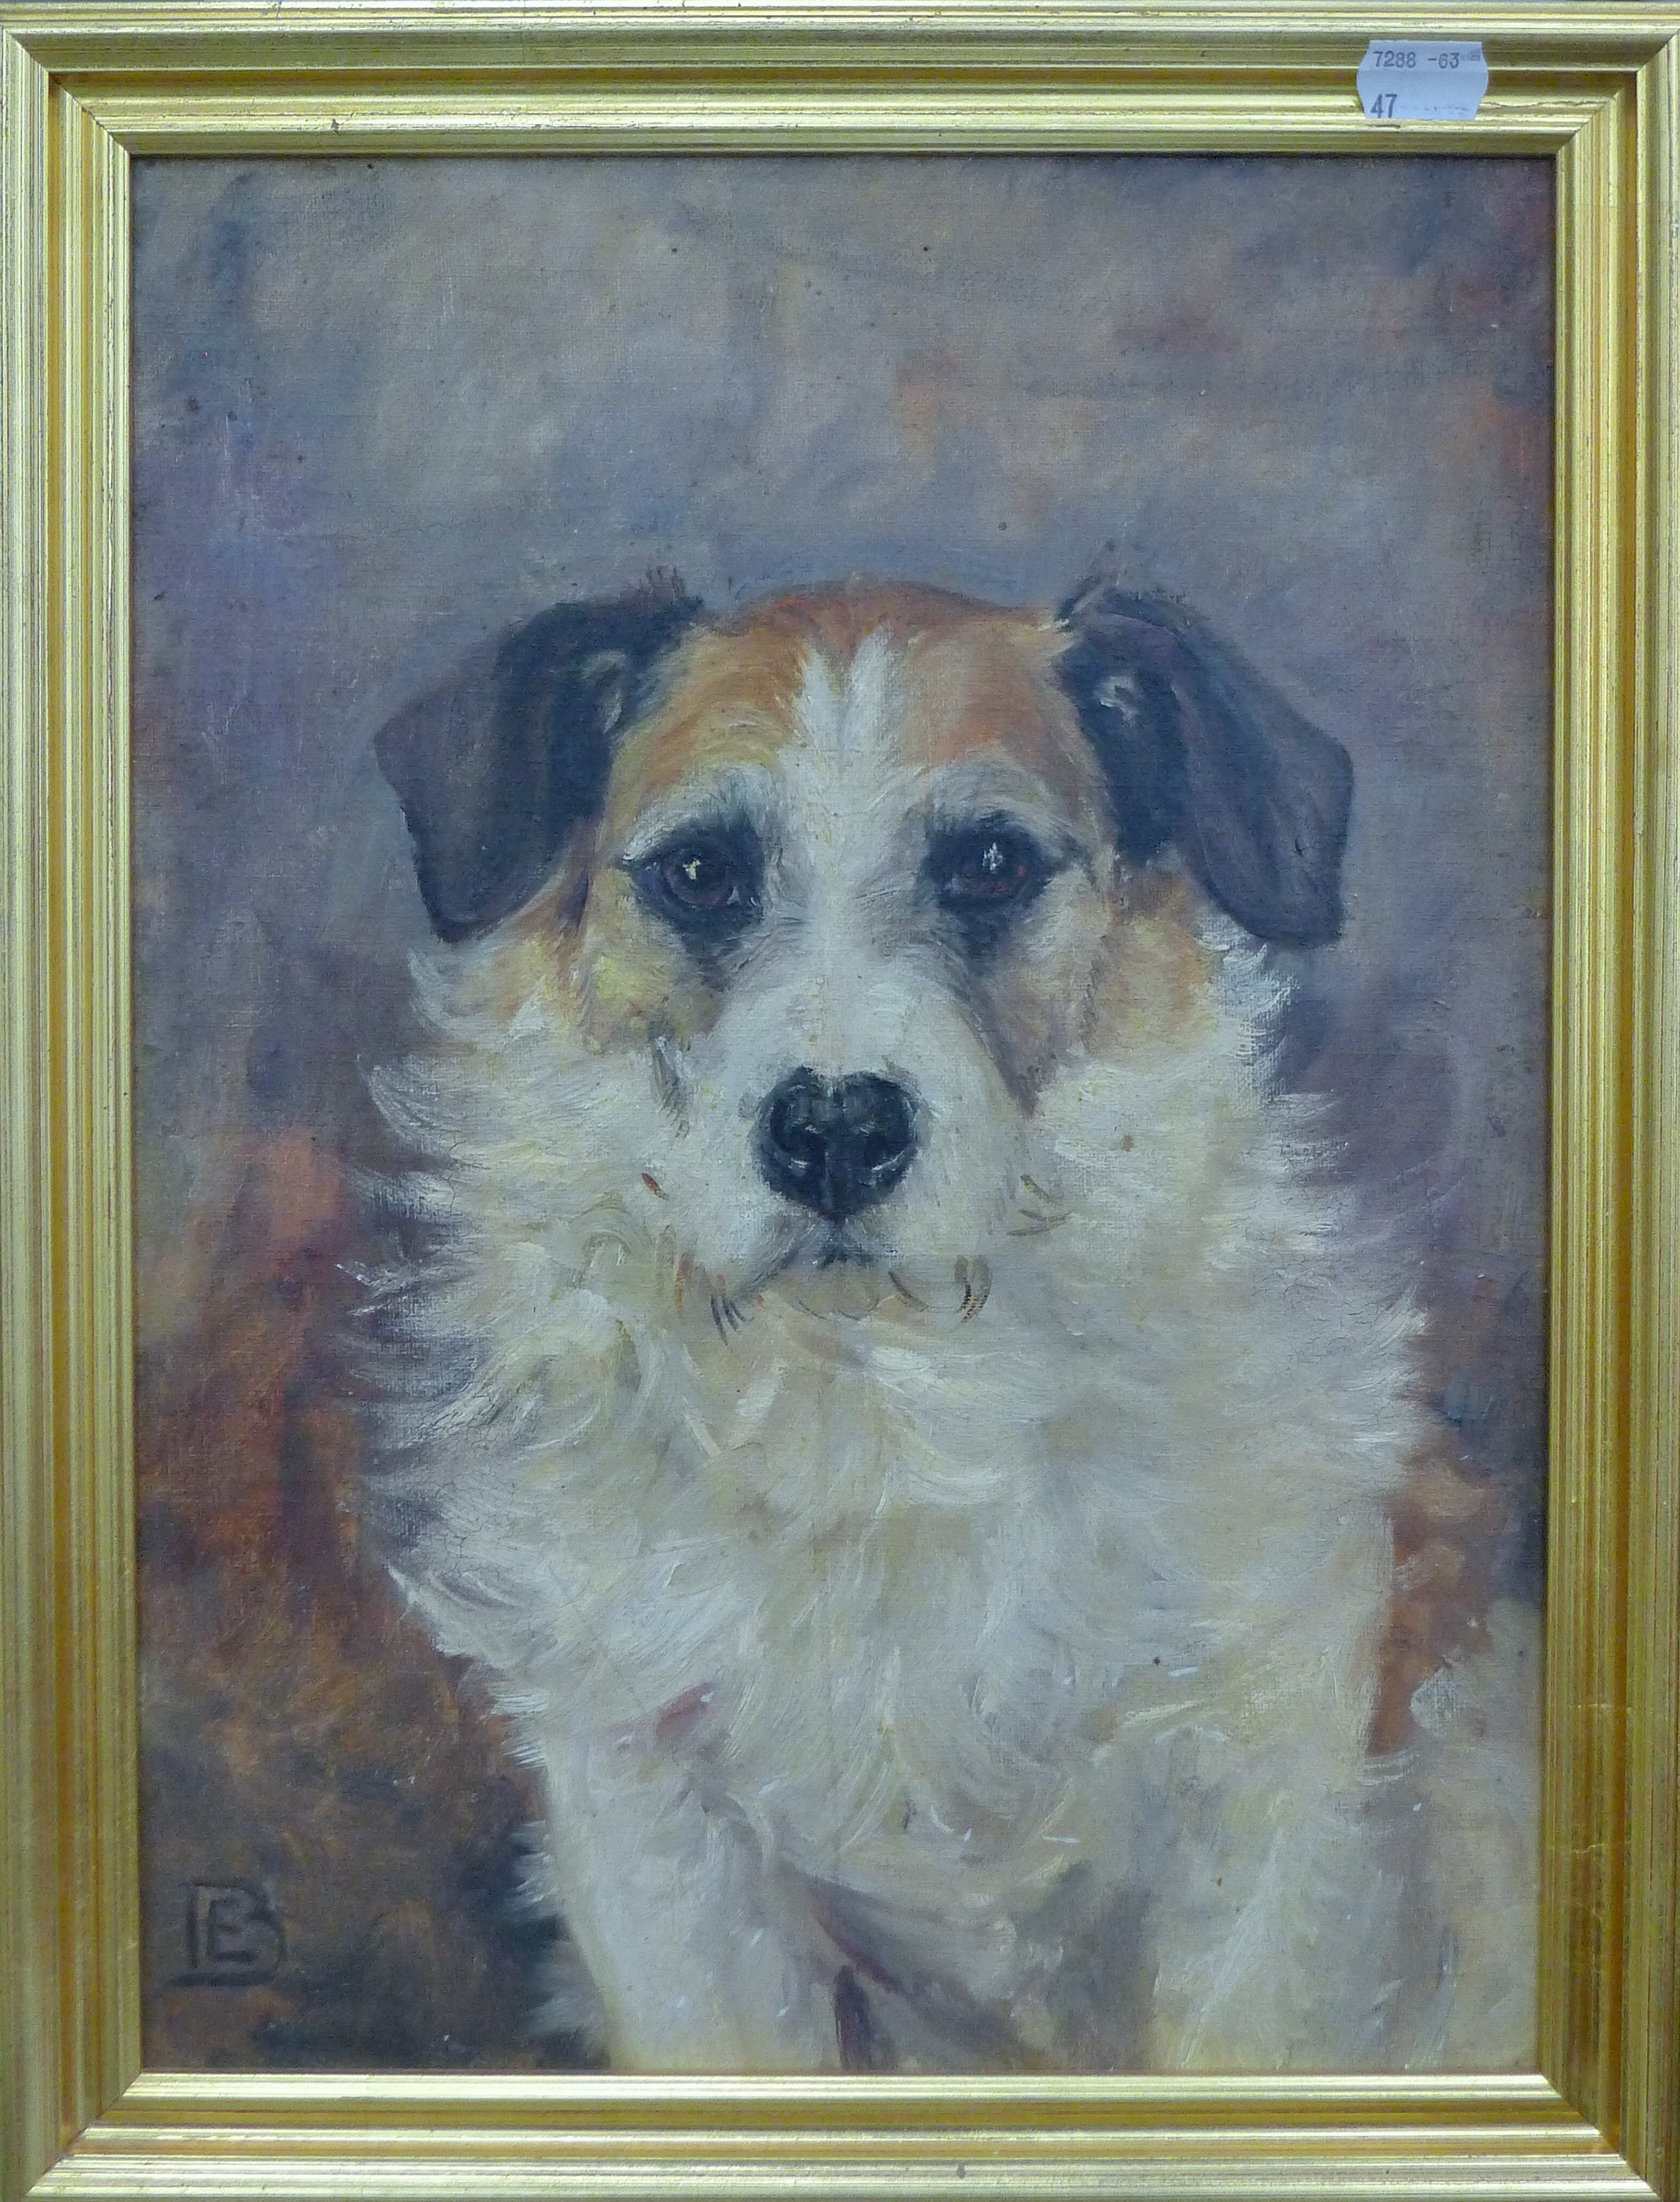 Seated Terrier, oil on board, initialled E.B, framed. 28 x 38.5 cm. - Image 2 of 3